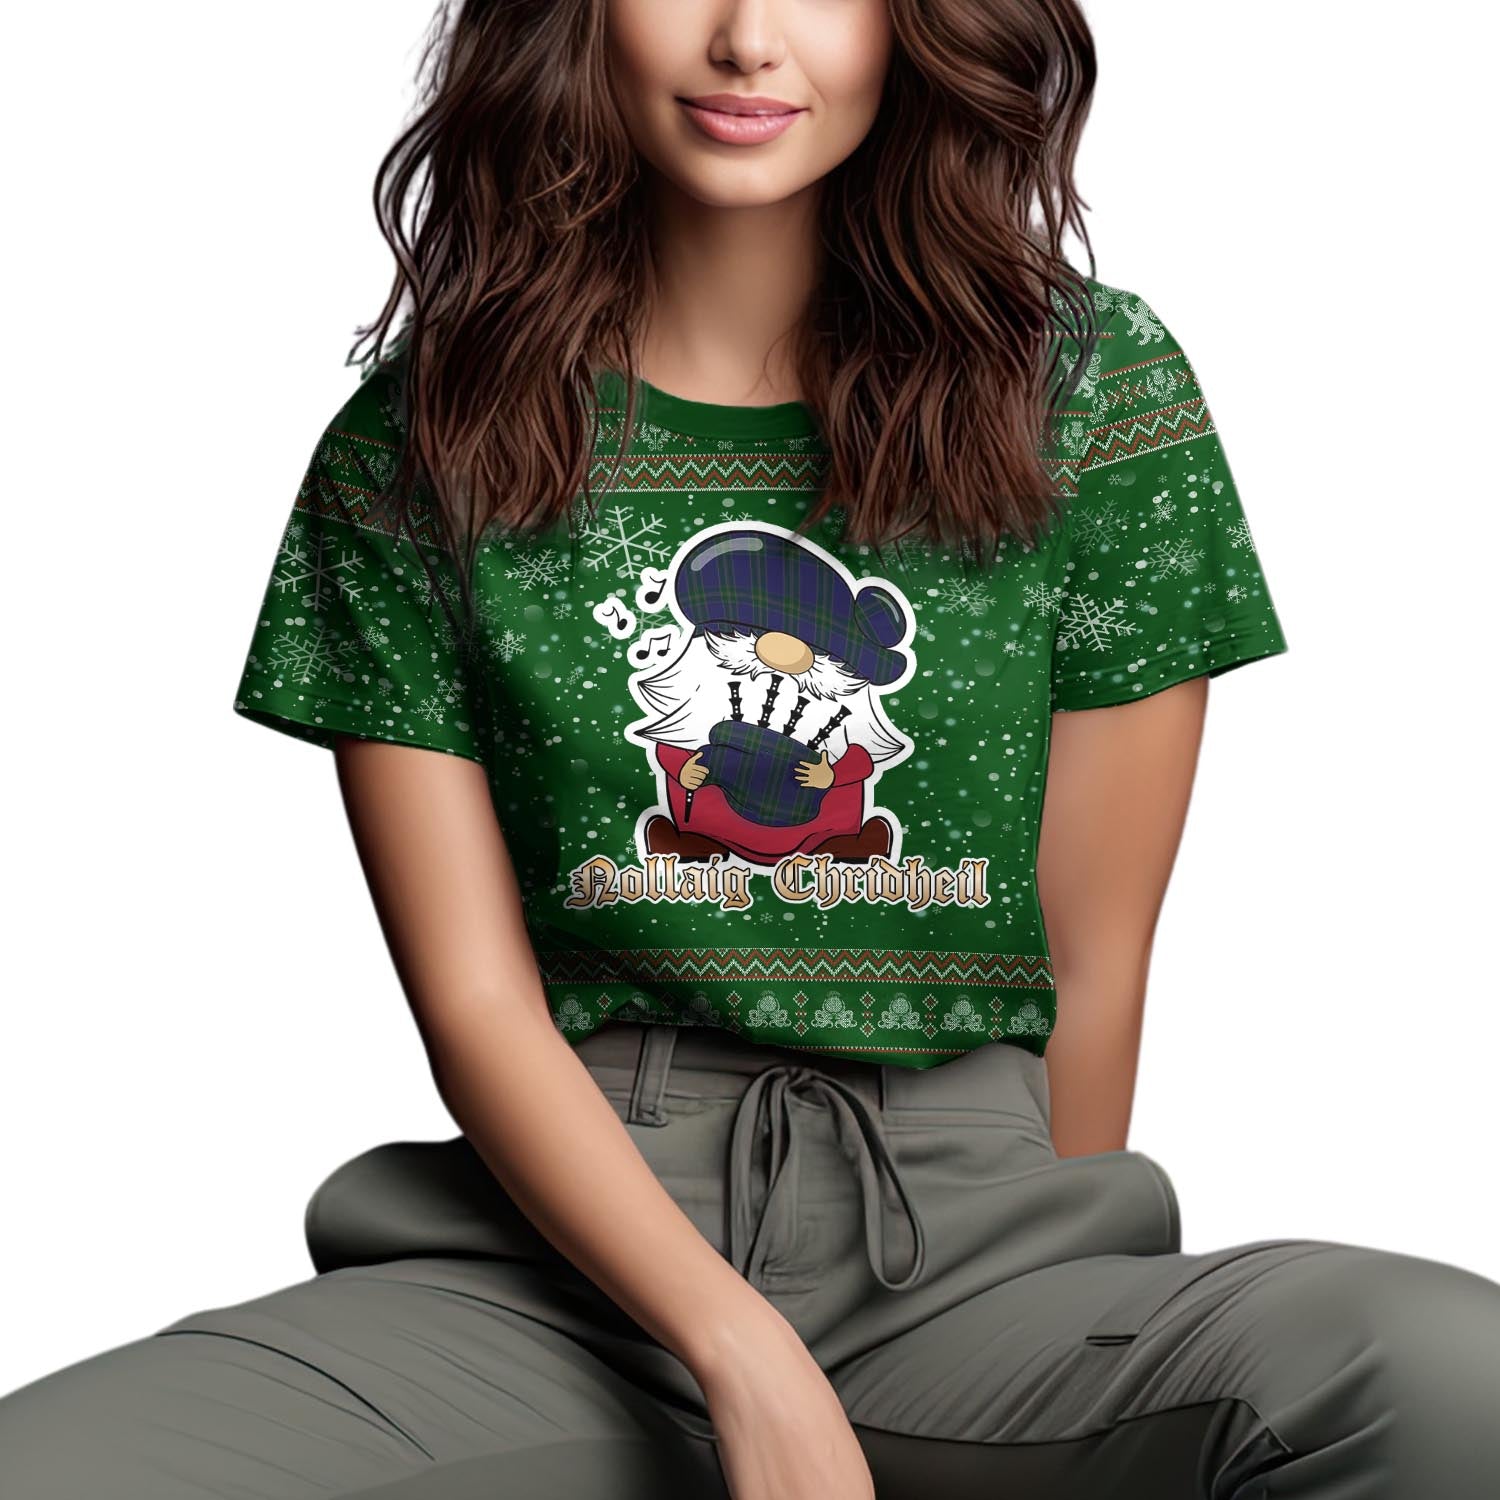 Lewis of Wales Clan Christmas Family T-Shirt with Funny Gnome Playing Bagpipes Women's Shirt Green - Tartanvibesclothing